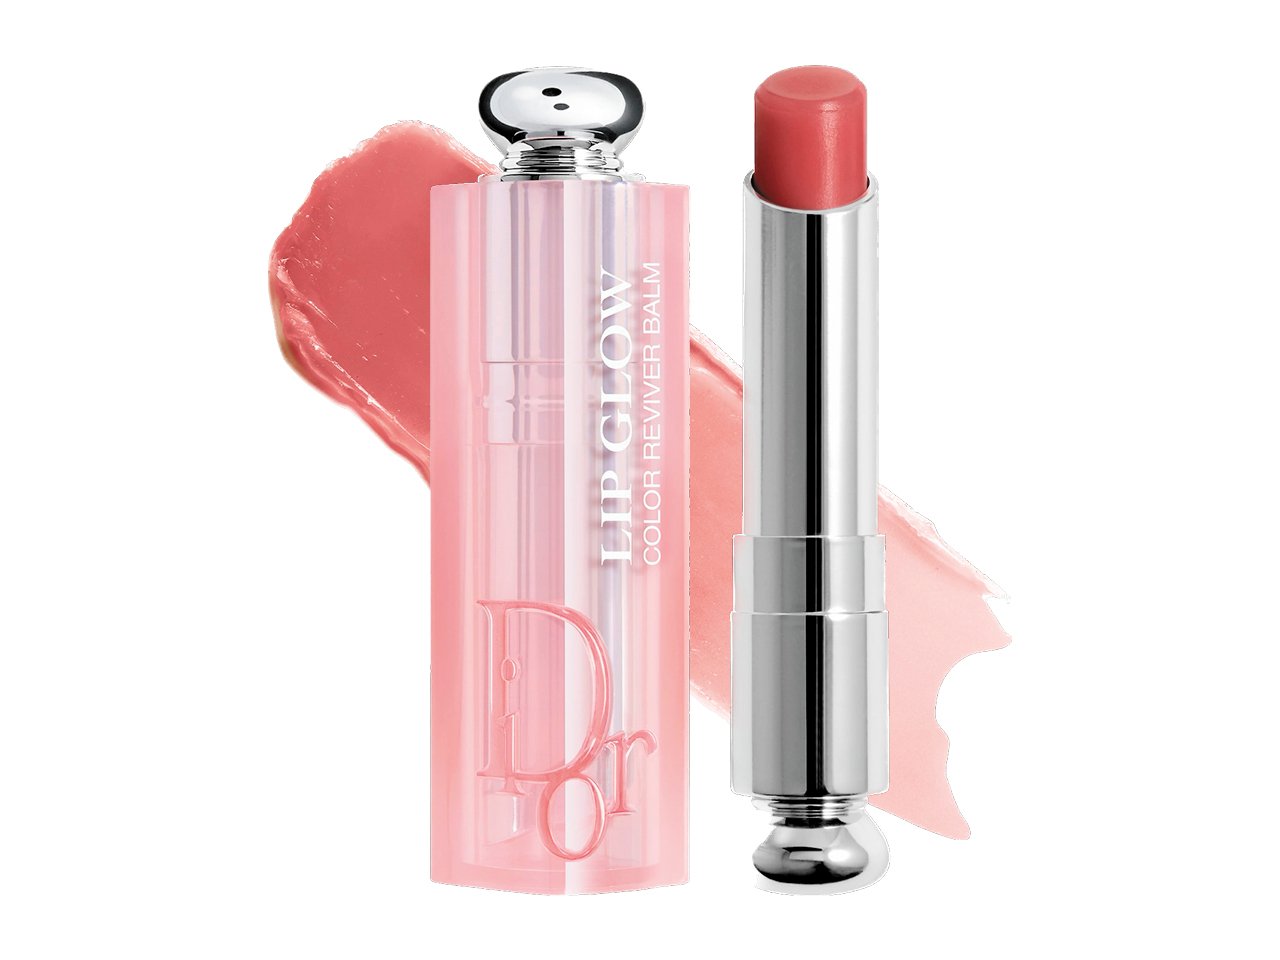 A tube of Dior Dior Addict Lip Glow Color Reviver Balm in Rosewood lip balm with a pink product swatch.